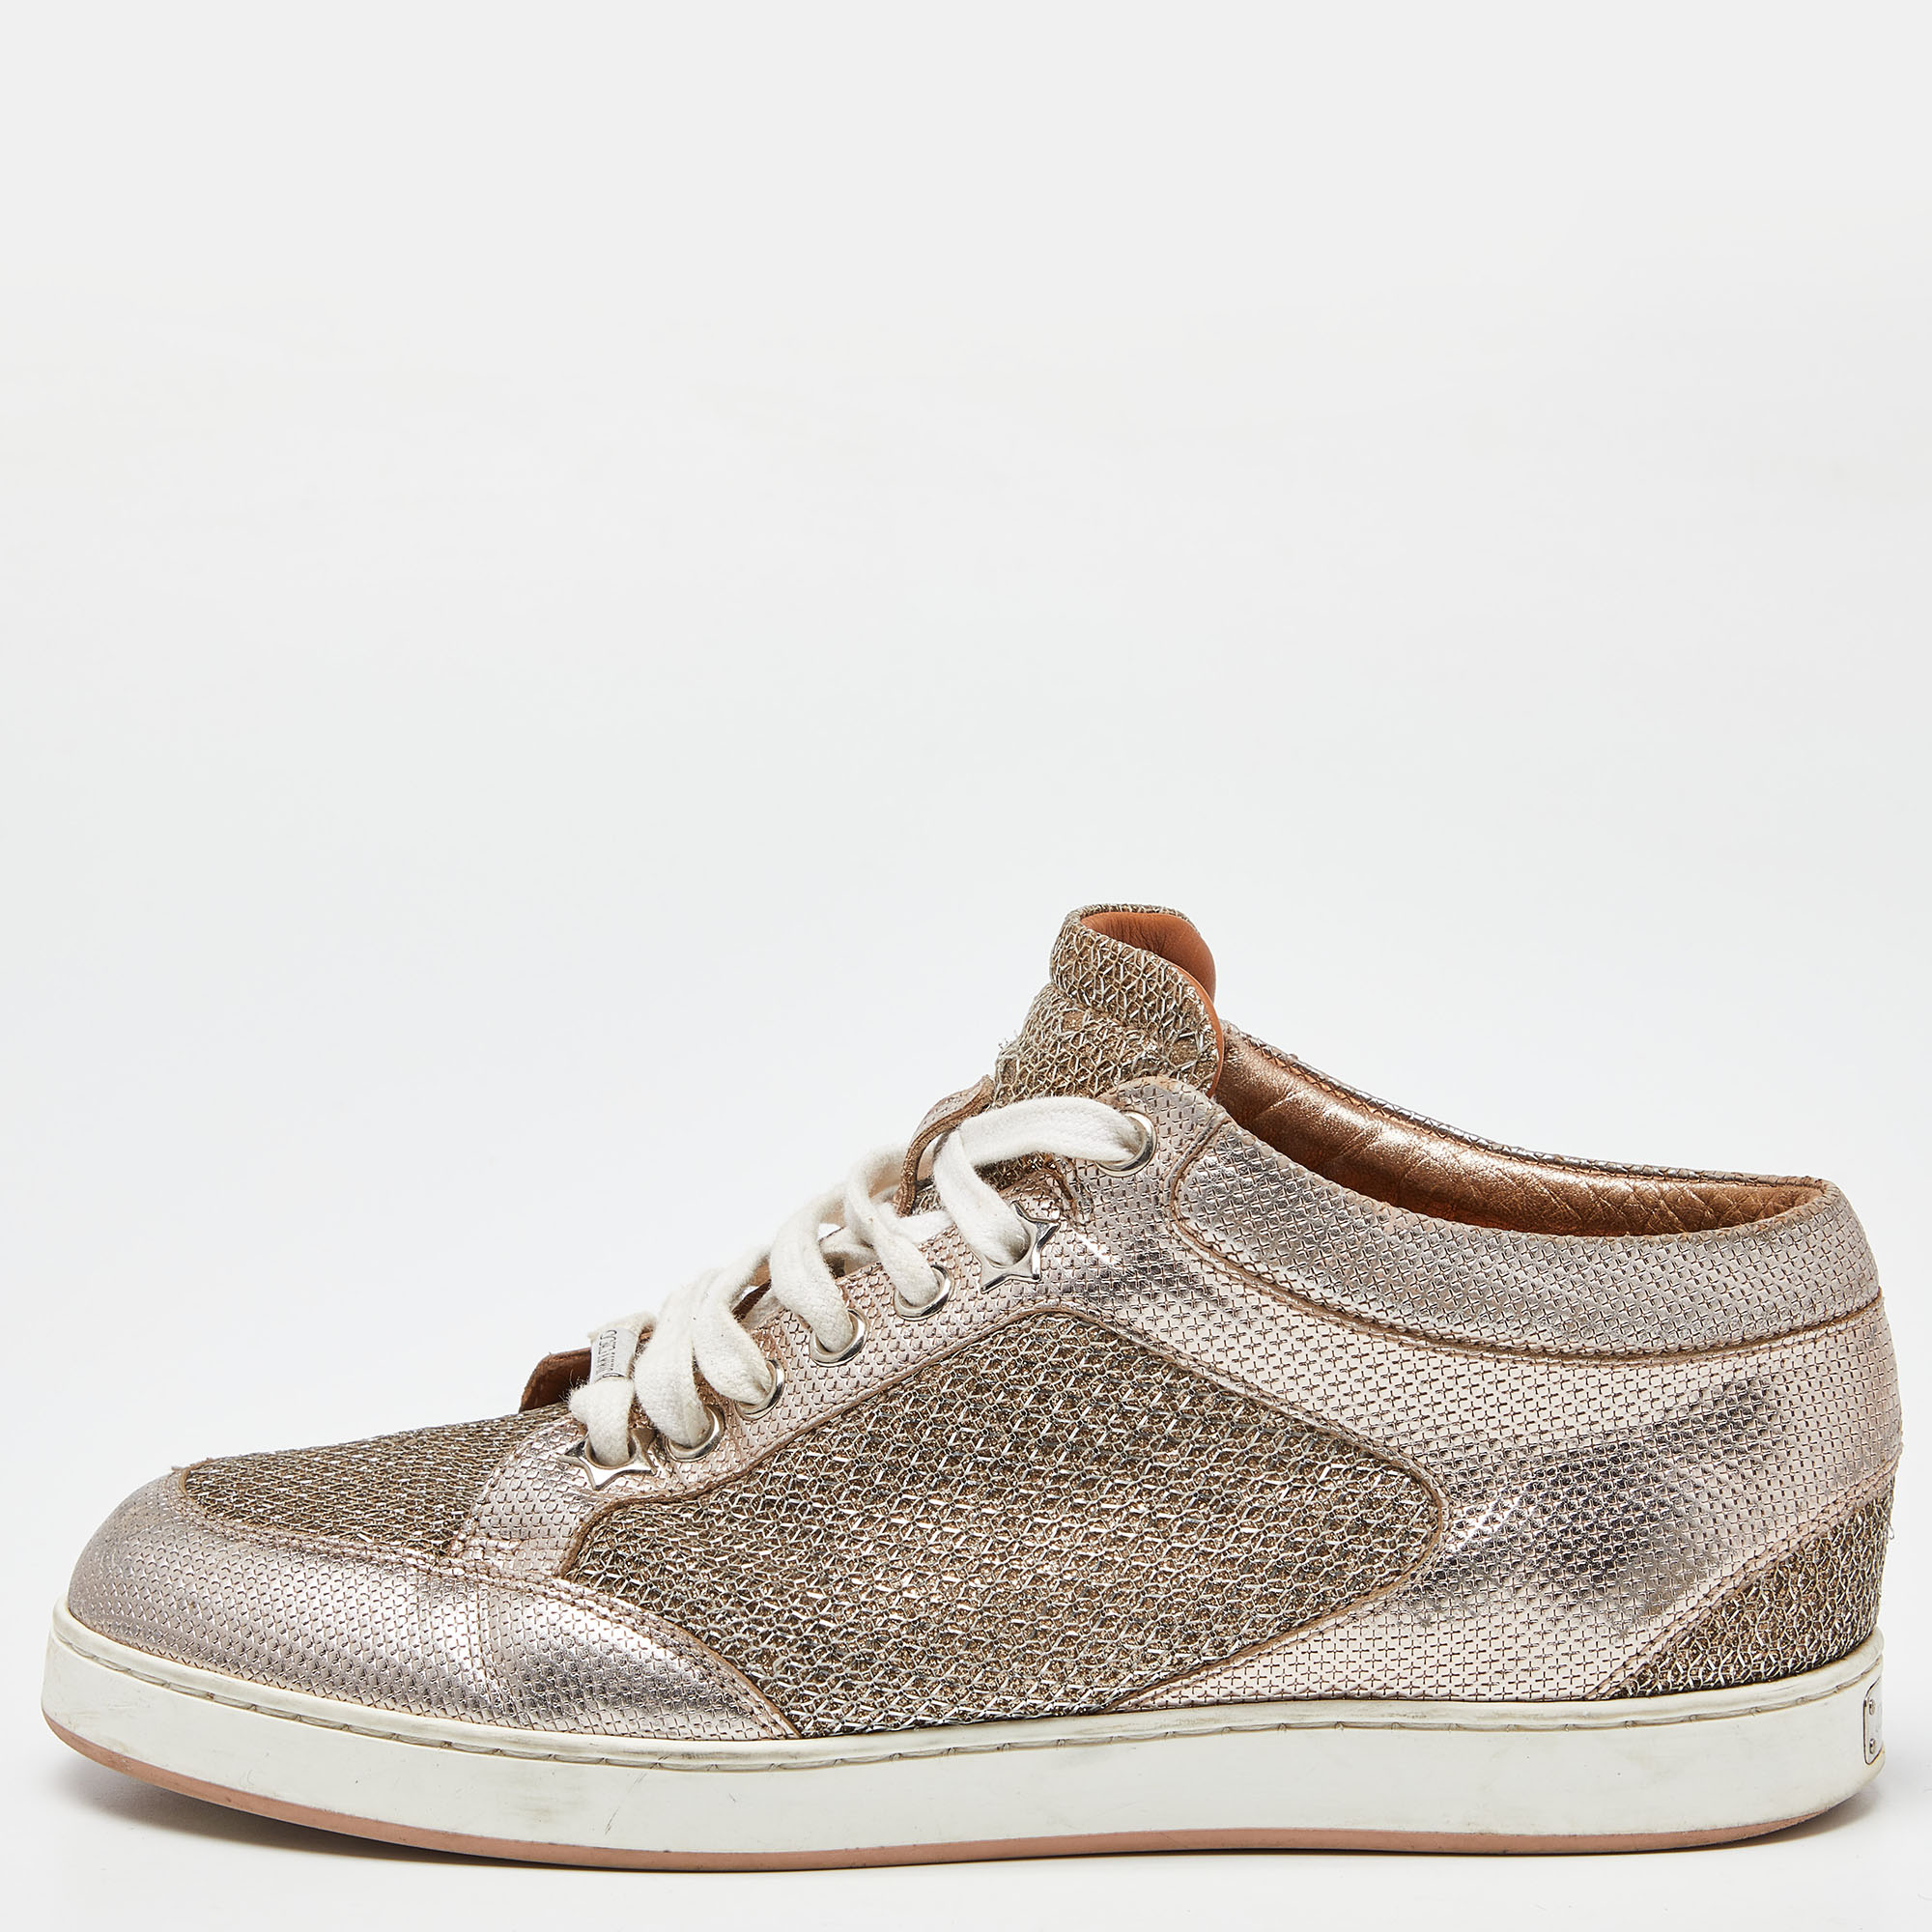 

Jimmy Choo Rose Gold Leather and Glitter Miami High Top Sneakers Size